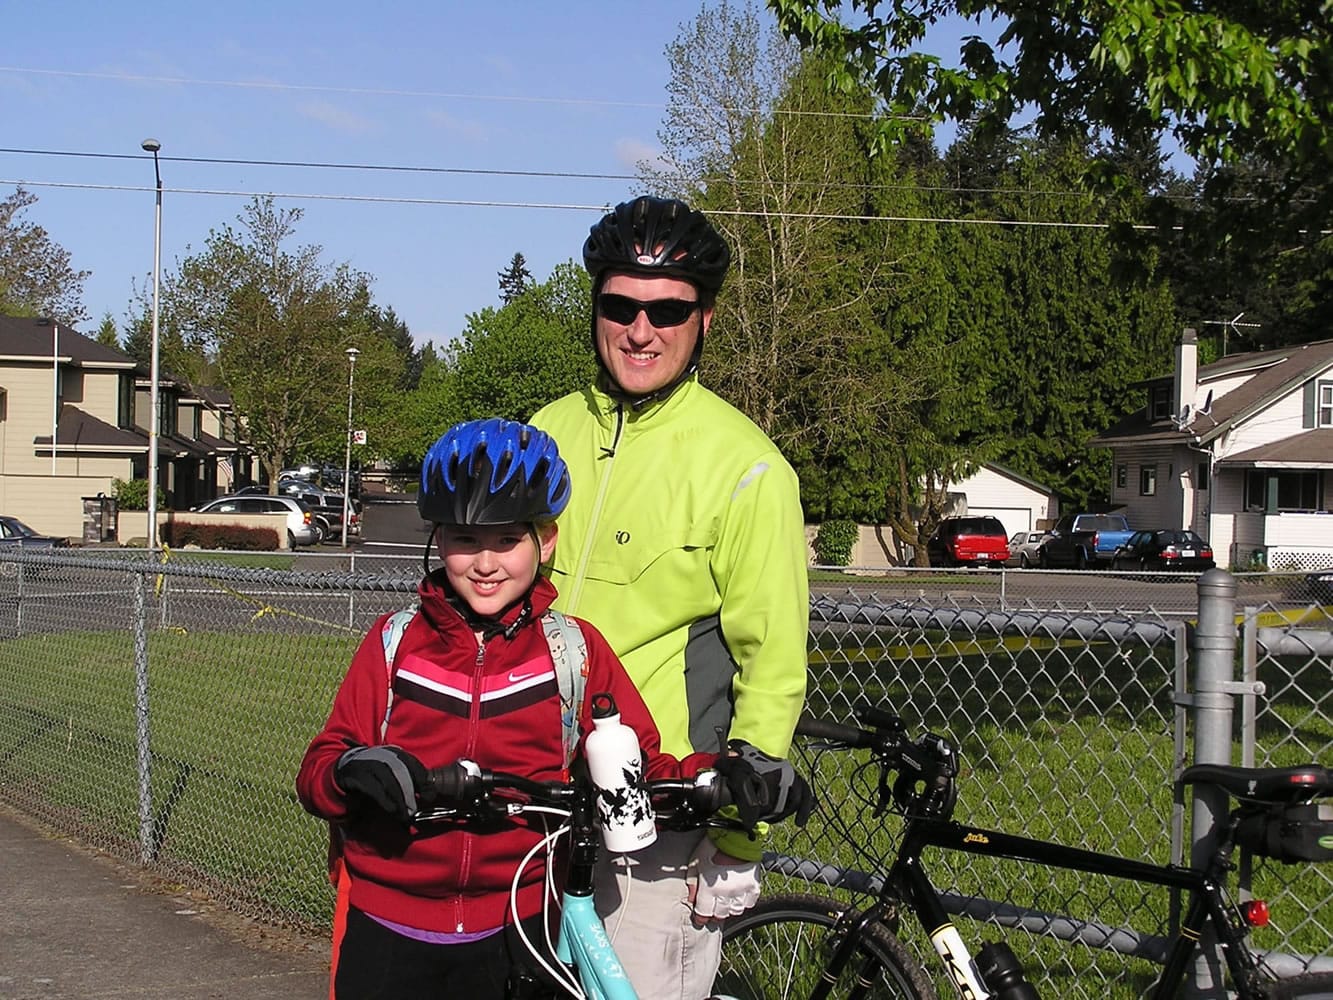 Bagley Downs: Edwin Quick and his daughter, Lili Bower Quick, rode their bikes to Roosevelt Elementary School on National Bike to School Day on May 9.